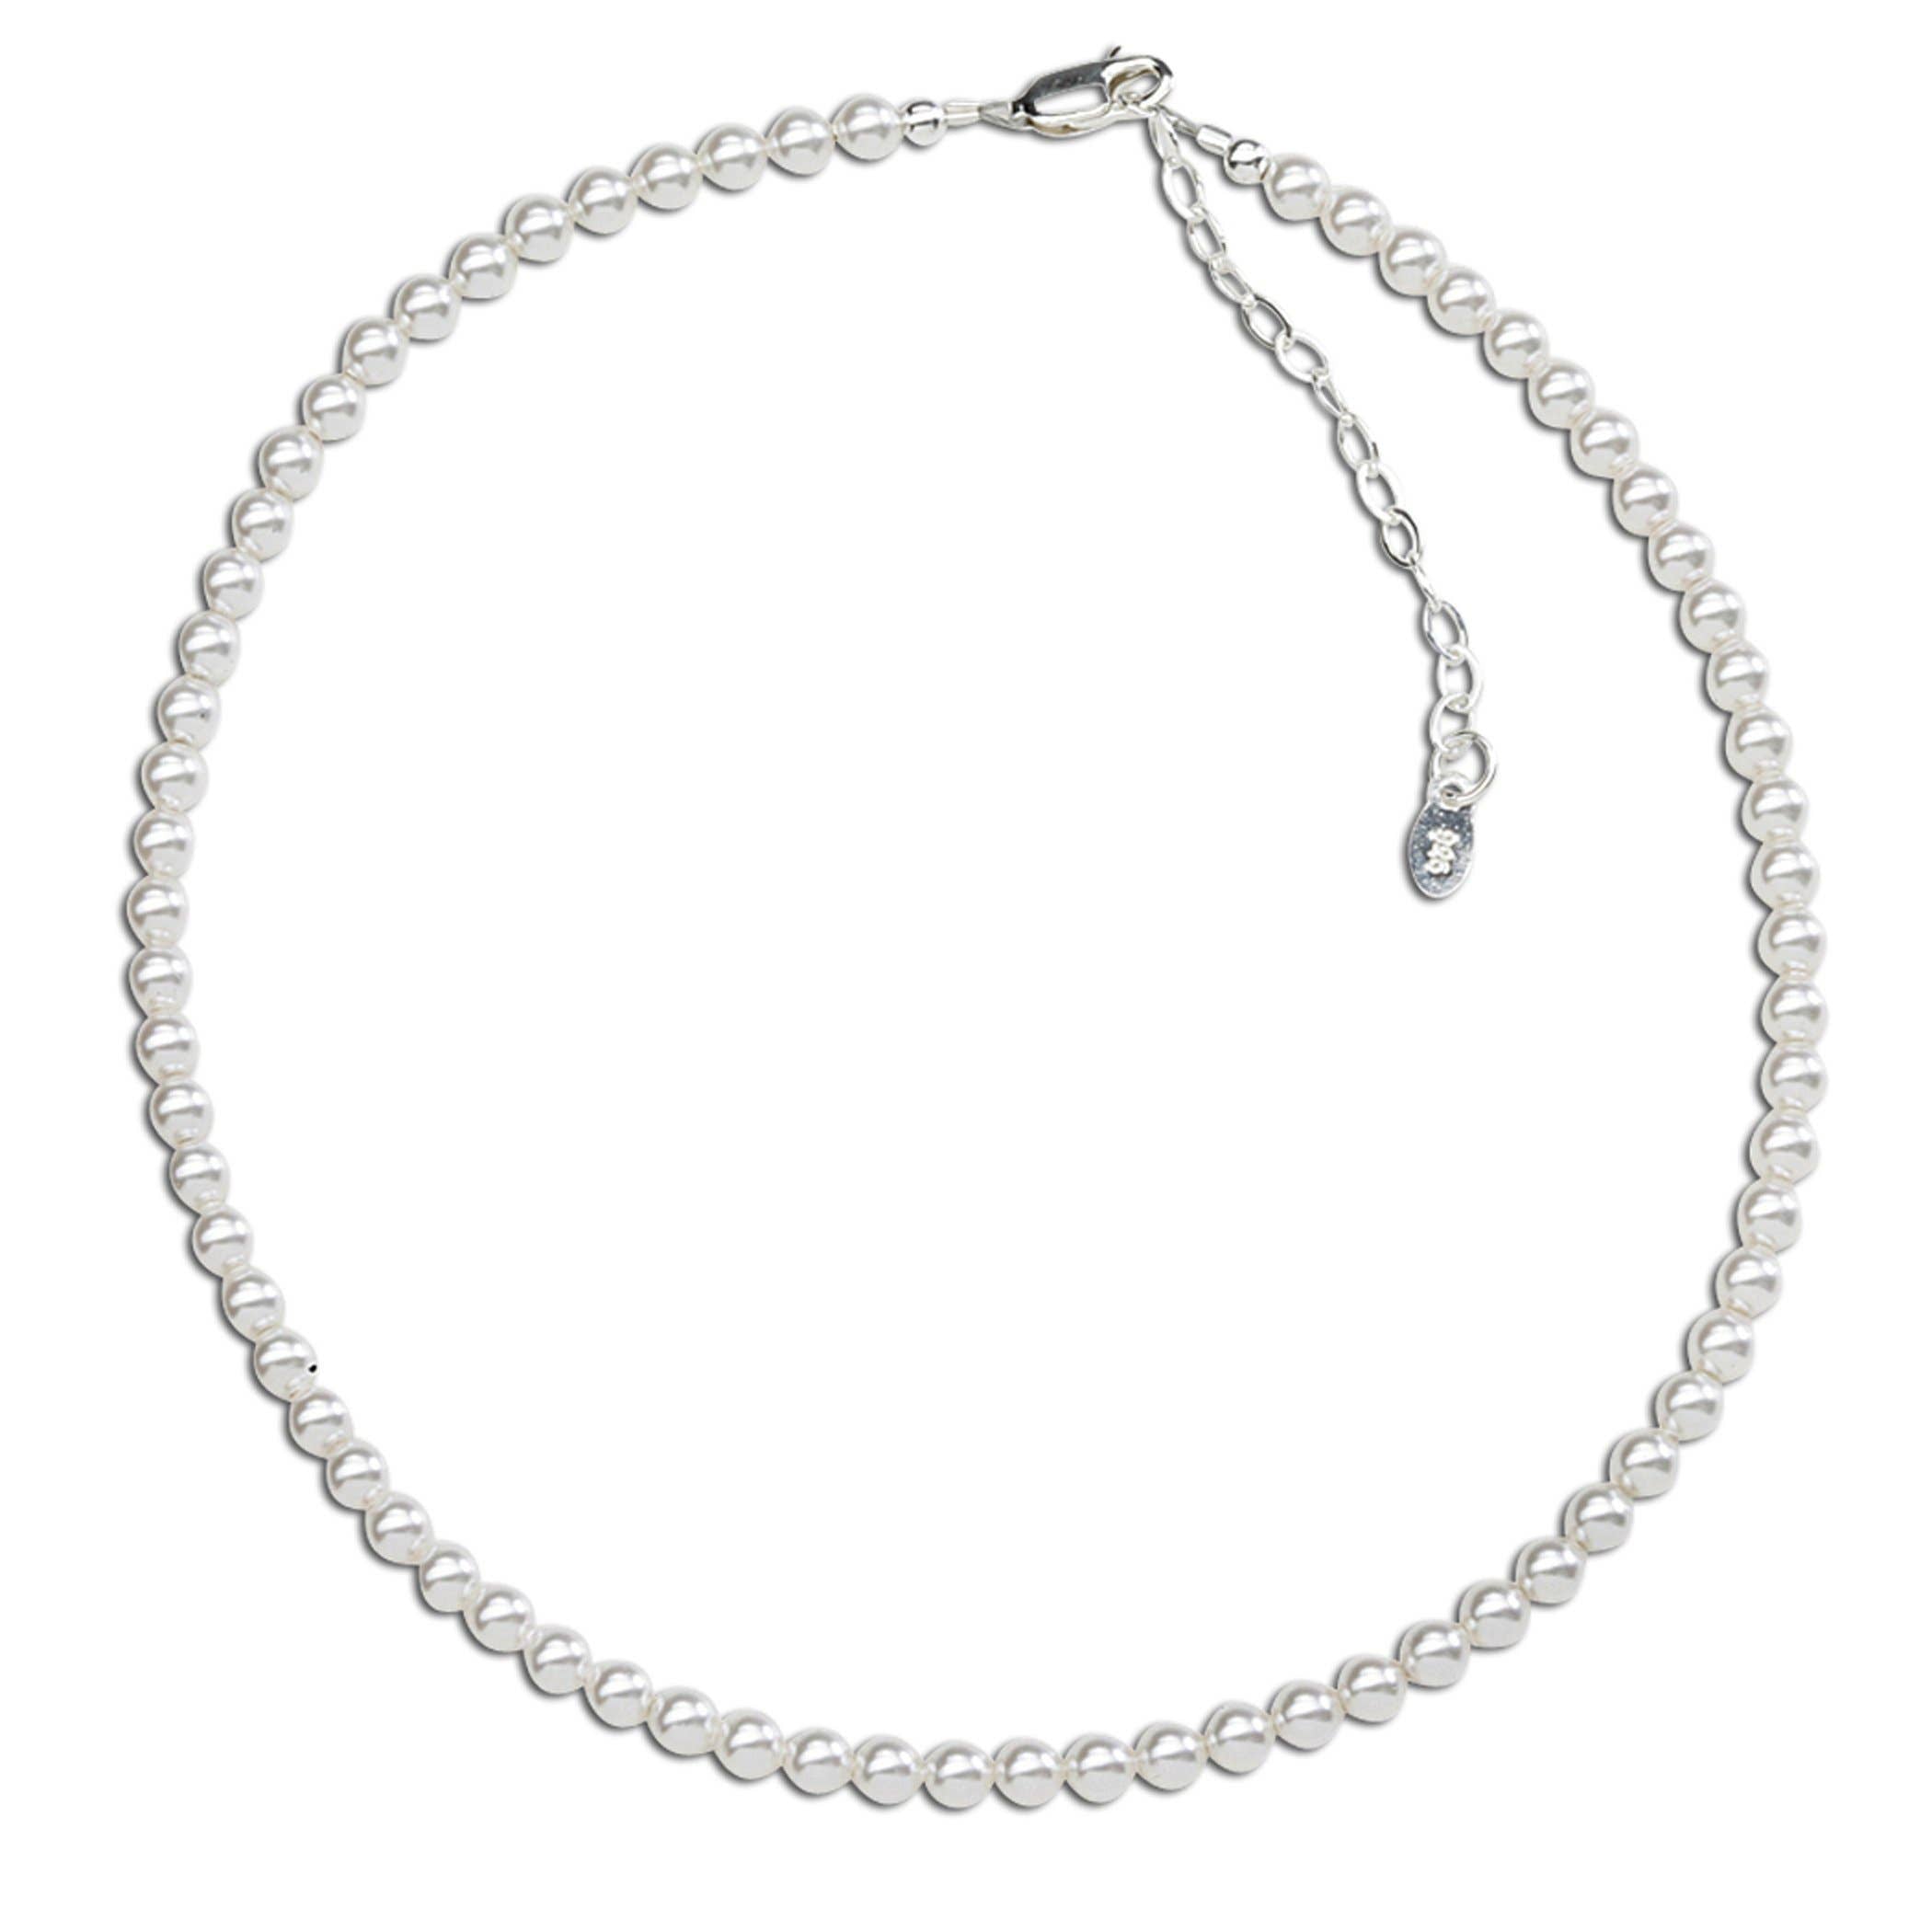 SERENITY STERLING SILVER GIRLS HIG-END PEARL NECKLACE